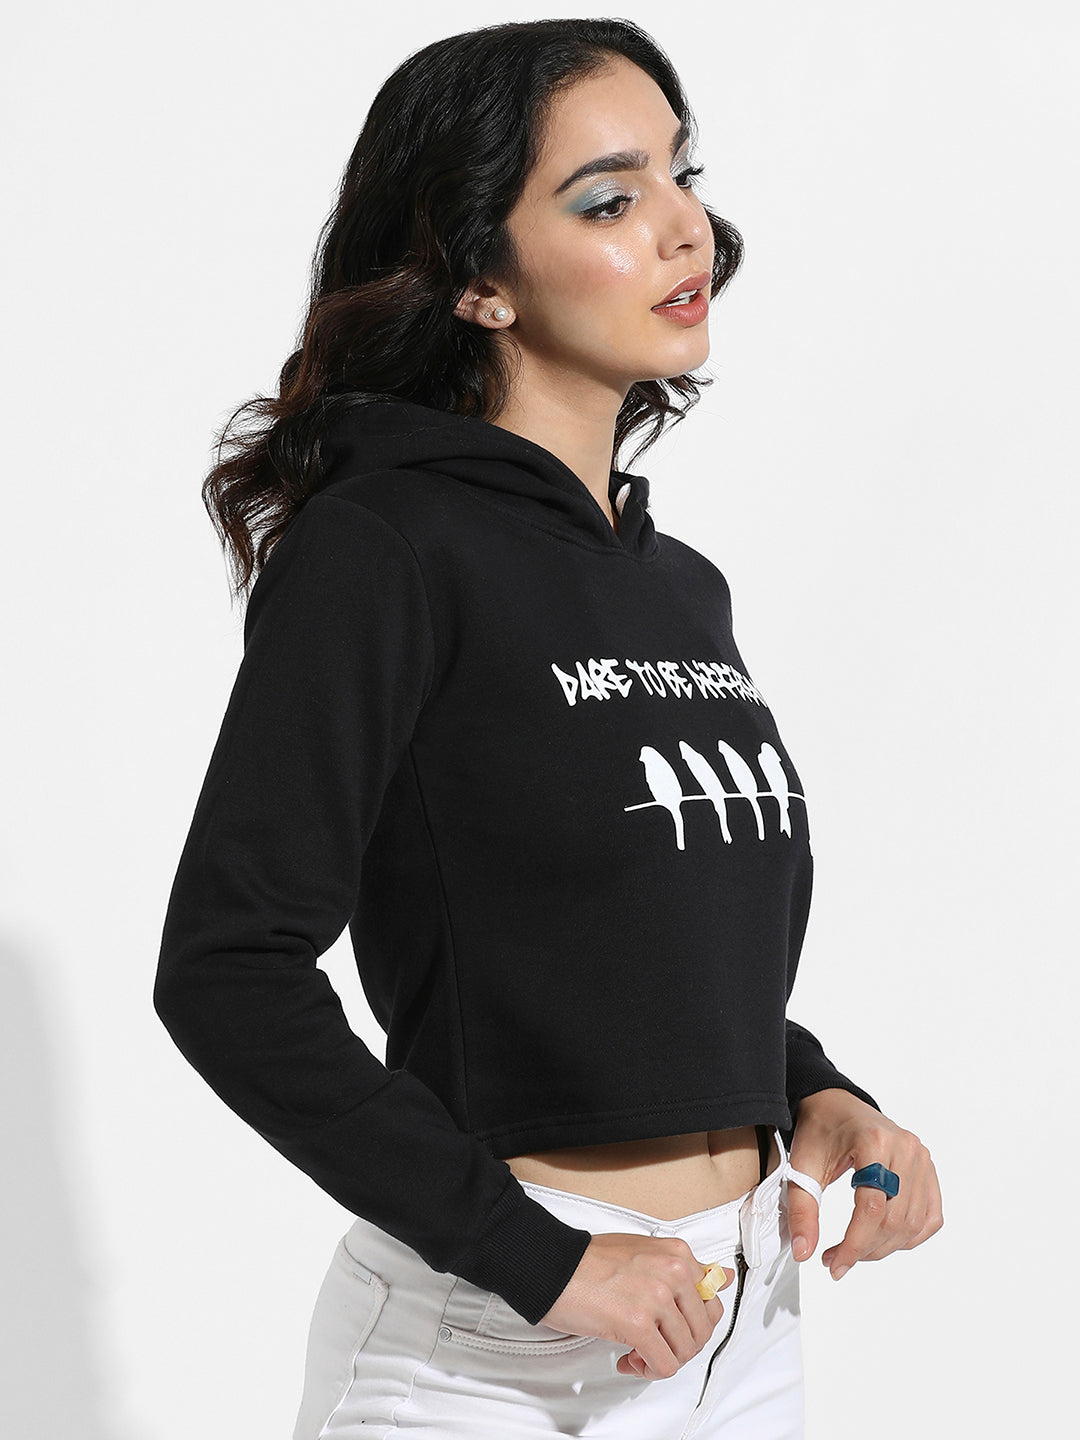 Too Be Different Cropped Hoodie